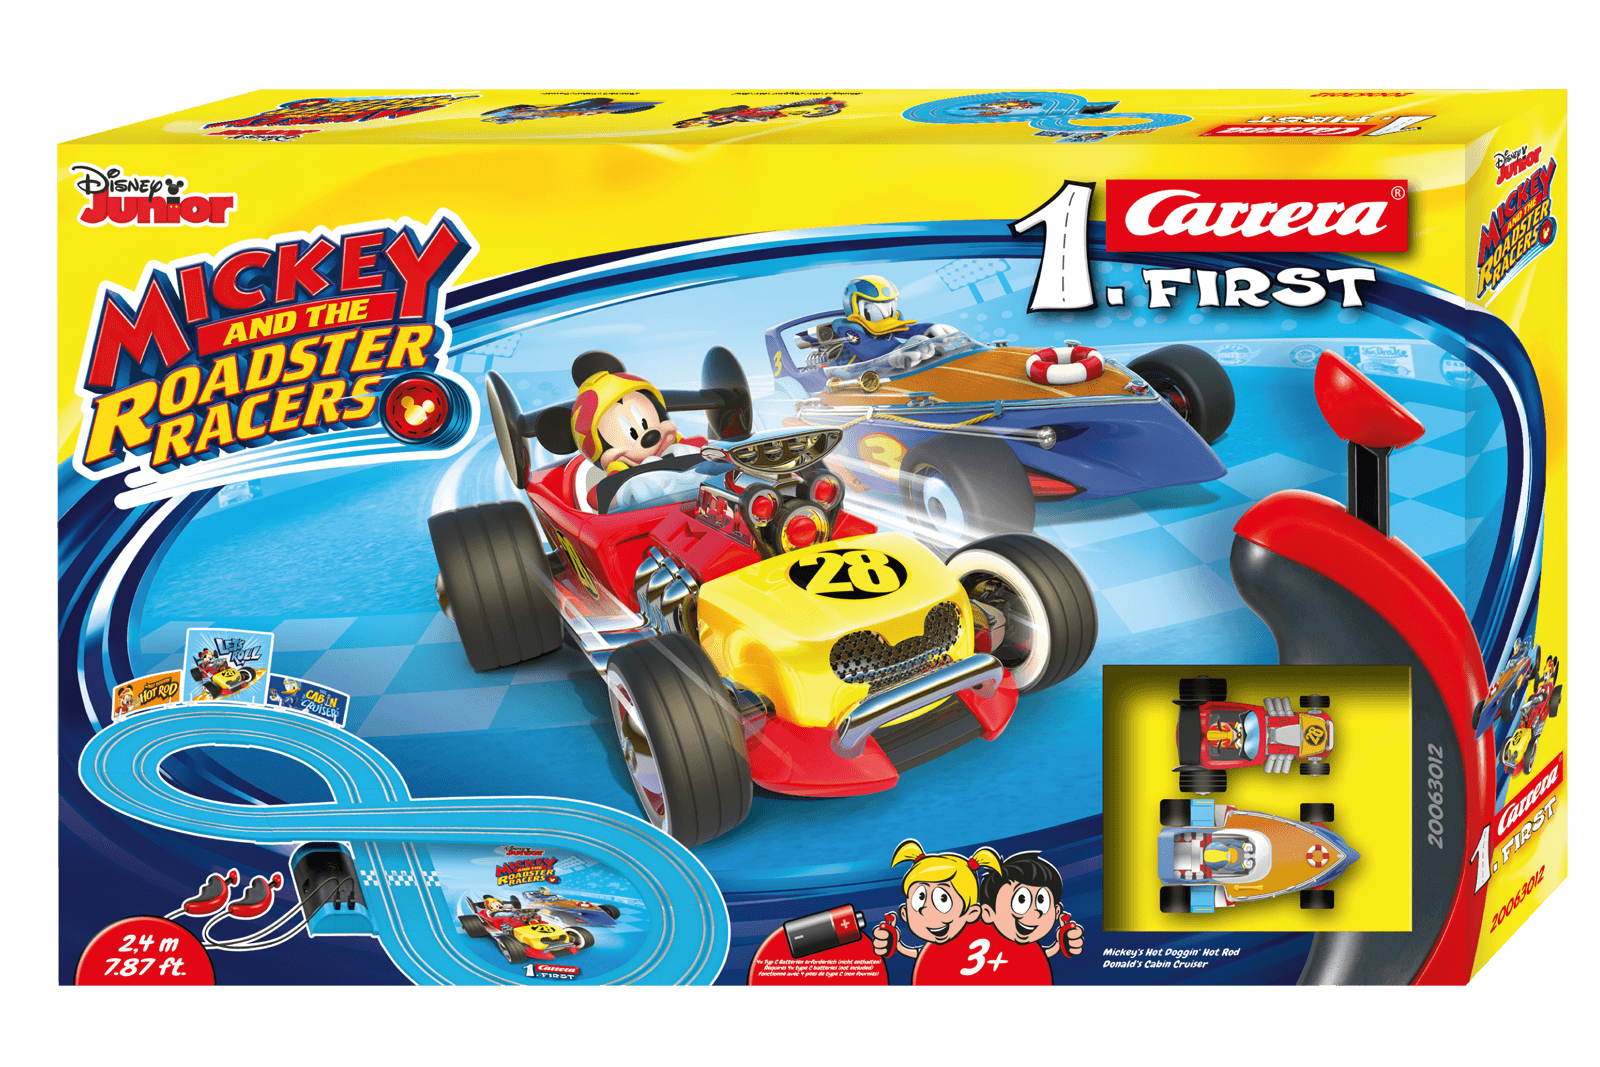 mickey roadster racers race track